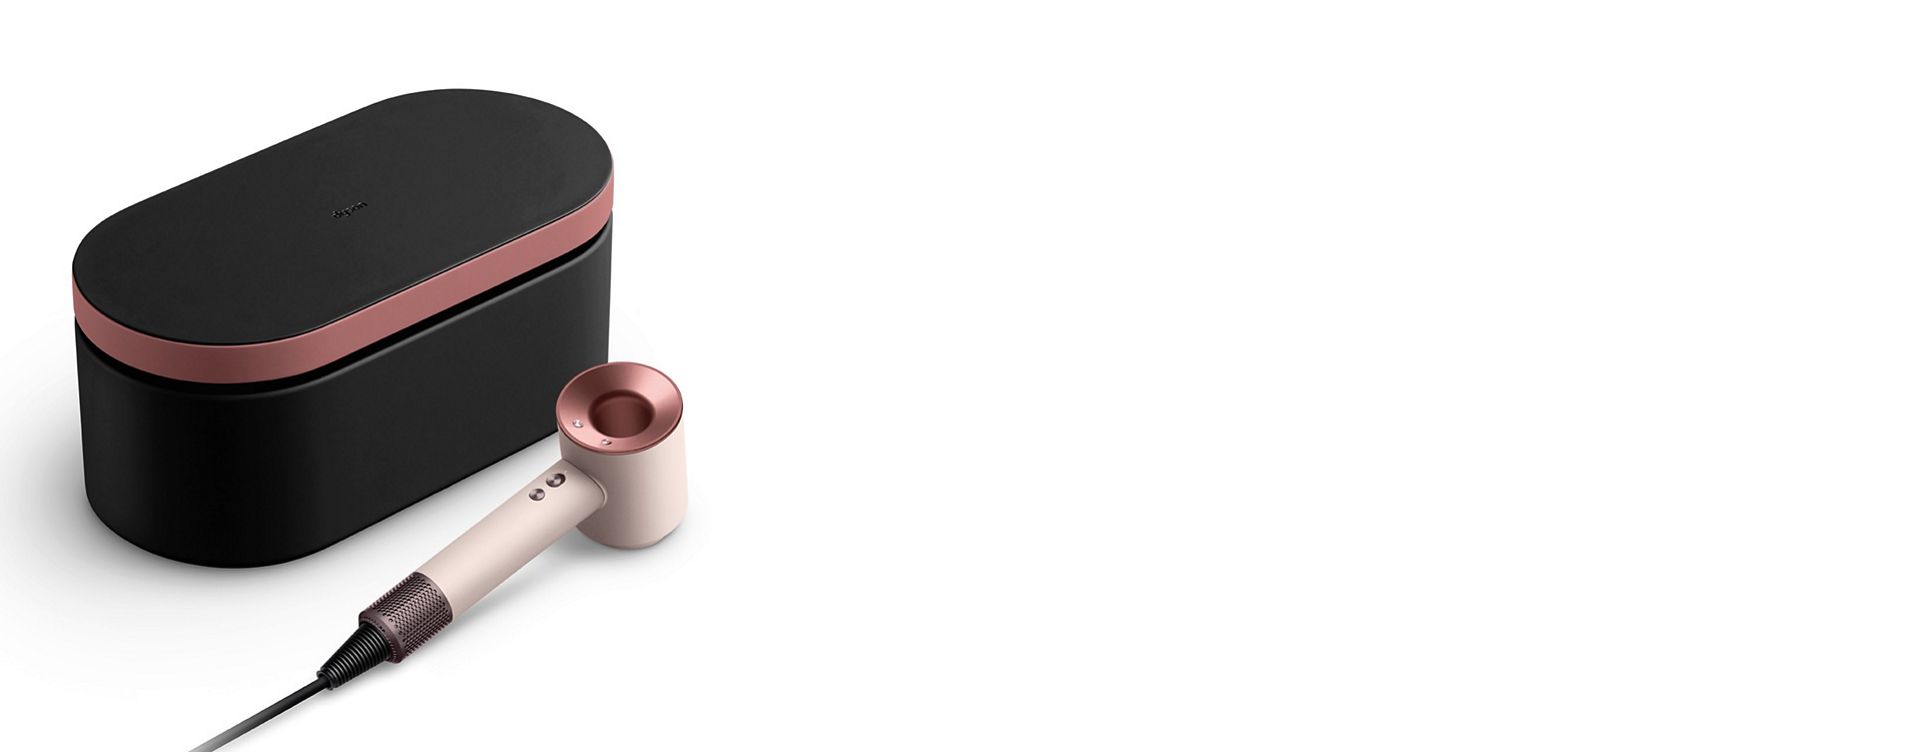 Dyson Supersonic hair dryer in Ceramic pink and rose gold and presentation case in Onyx rose gold.